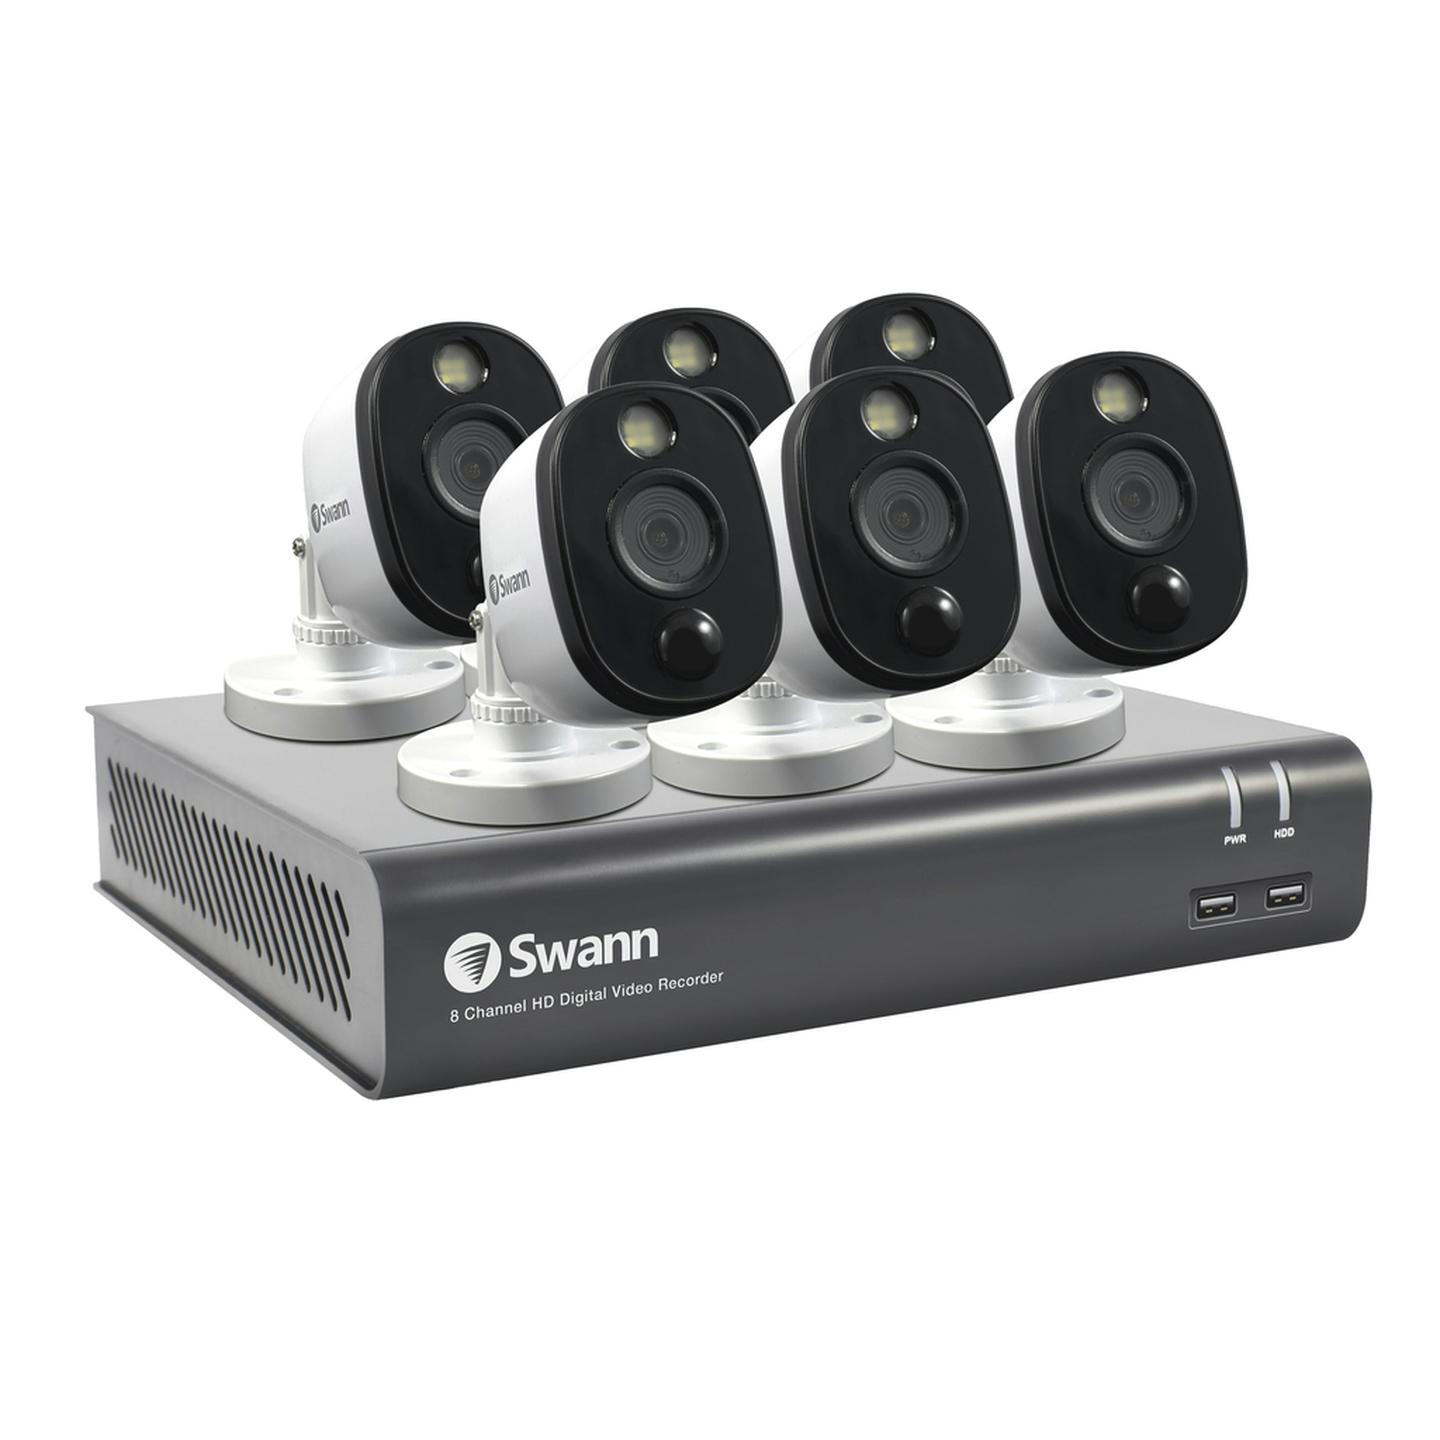 Swann 8CH 1080p DVR Kit with 6 x 1080p PIR with Warning Spot Lights Cameras